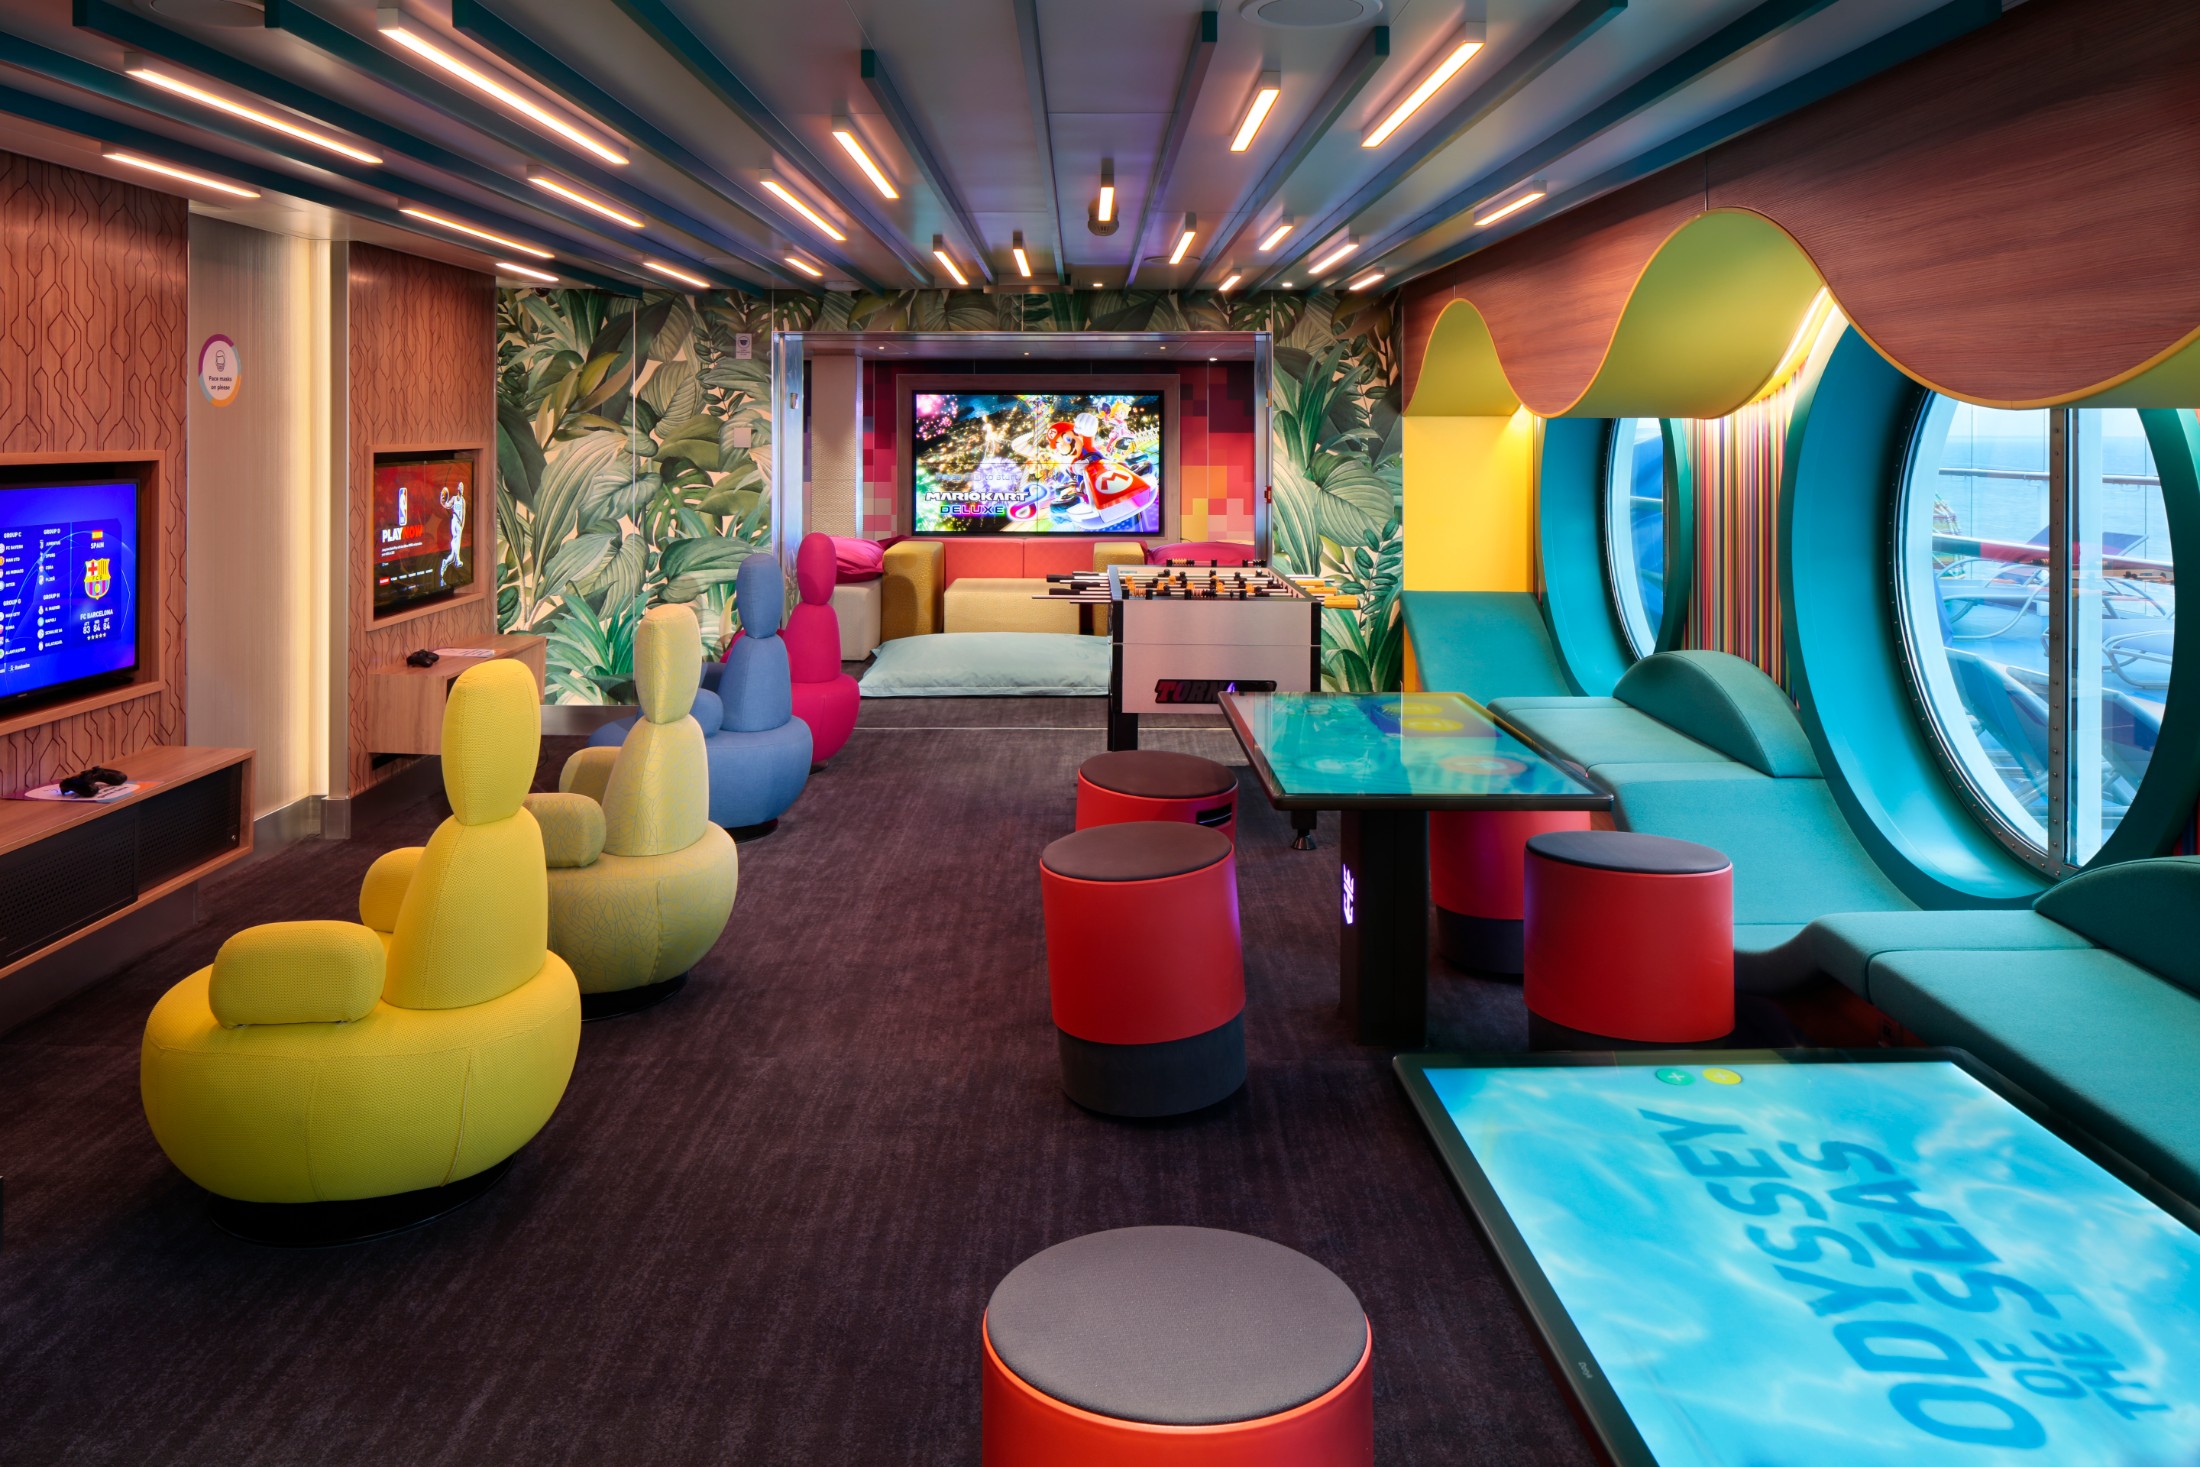 Teens sailing on Odyssey of the Seas can enjoy dedicated spaces to hang out without adults cramping their style. Social180 offers the latest in music, games and movies as well as an outdoor deck called The Patio.